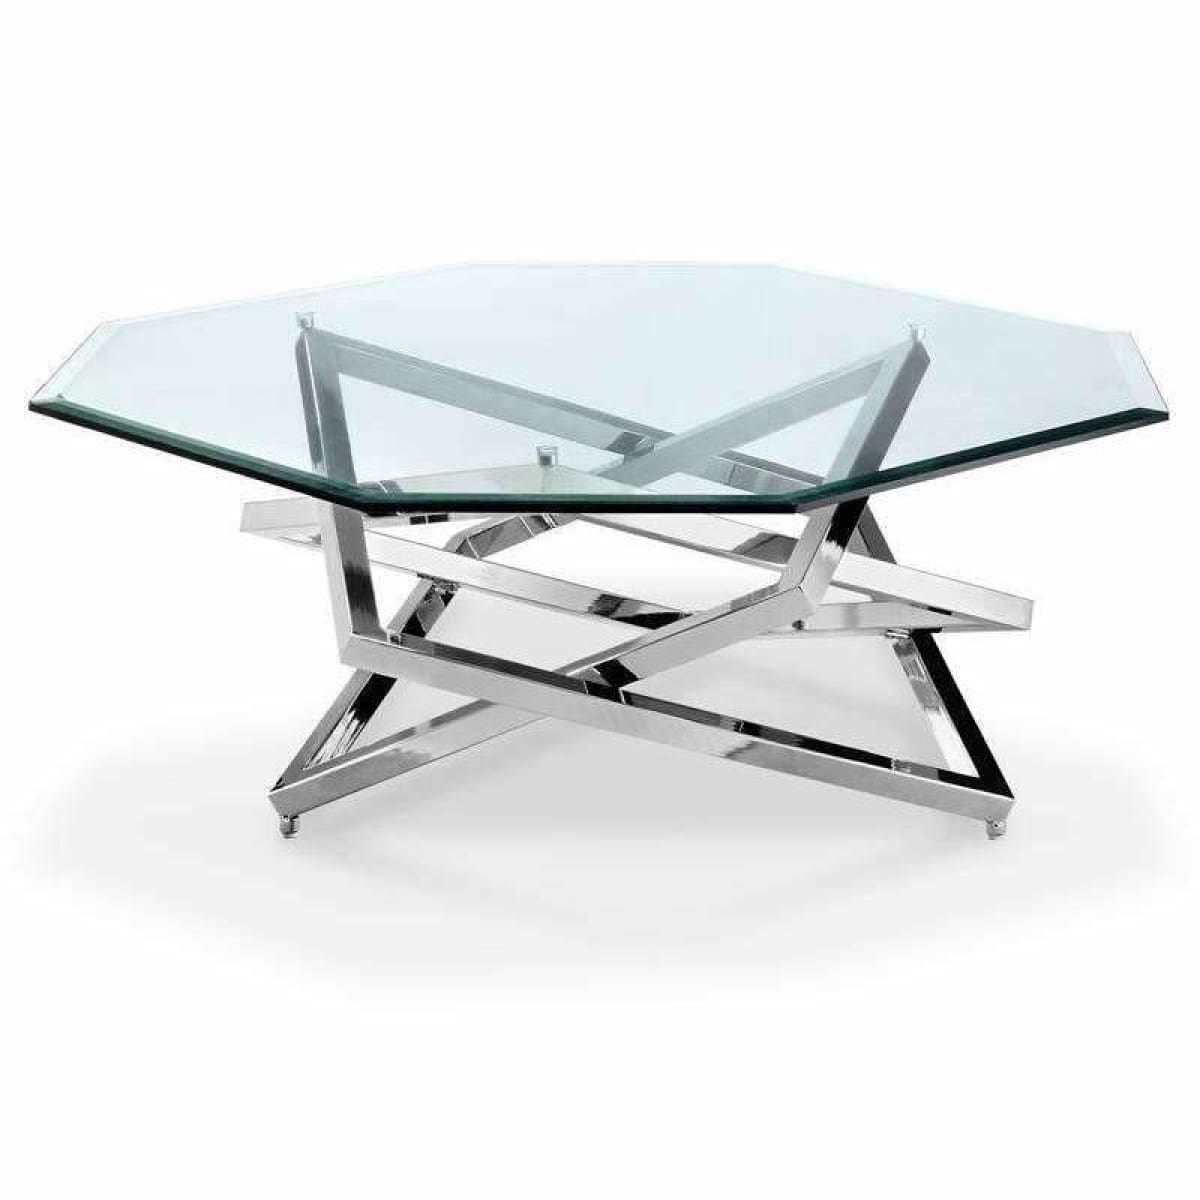 Lenox Square Octagonal cocktail Table - COFFEE TABLE